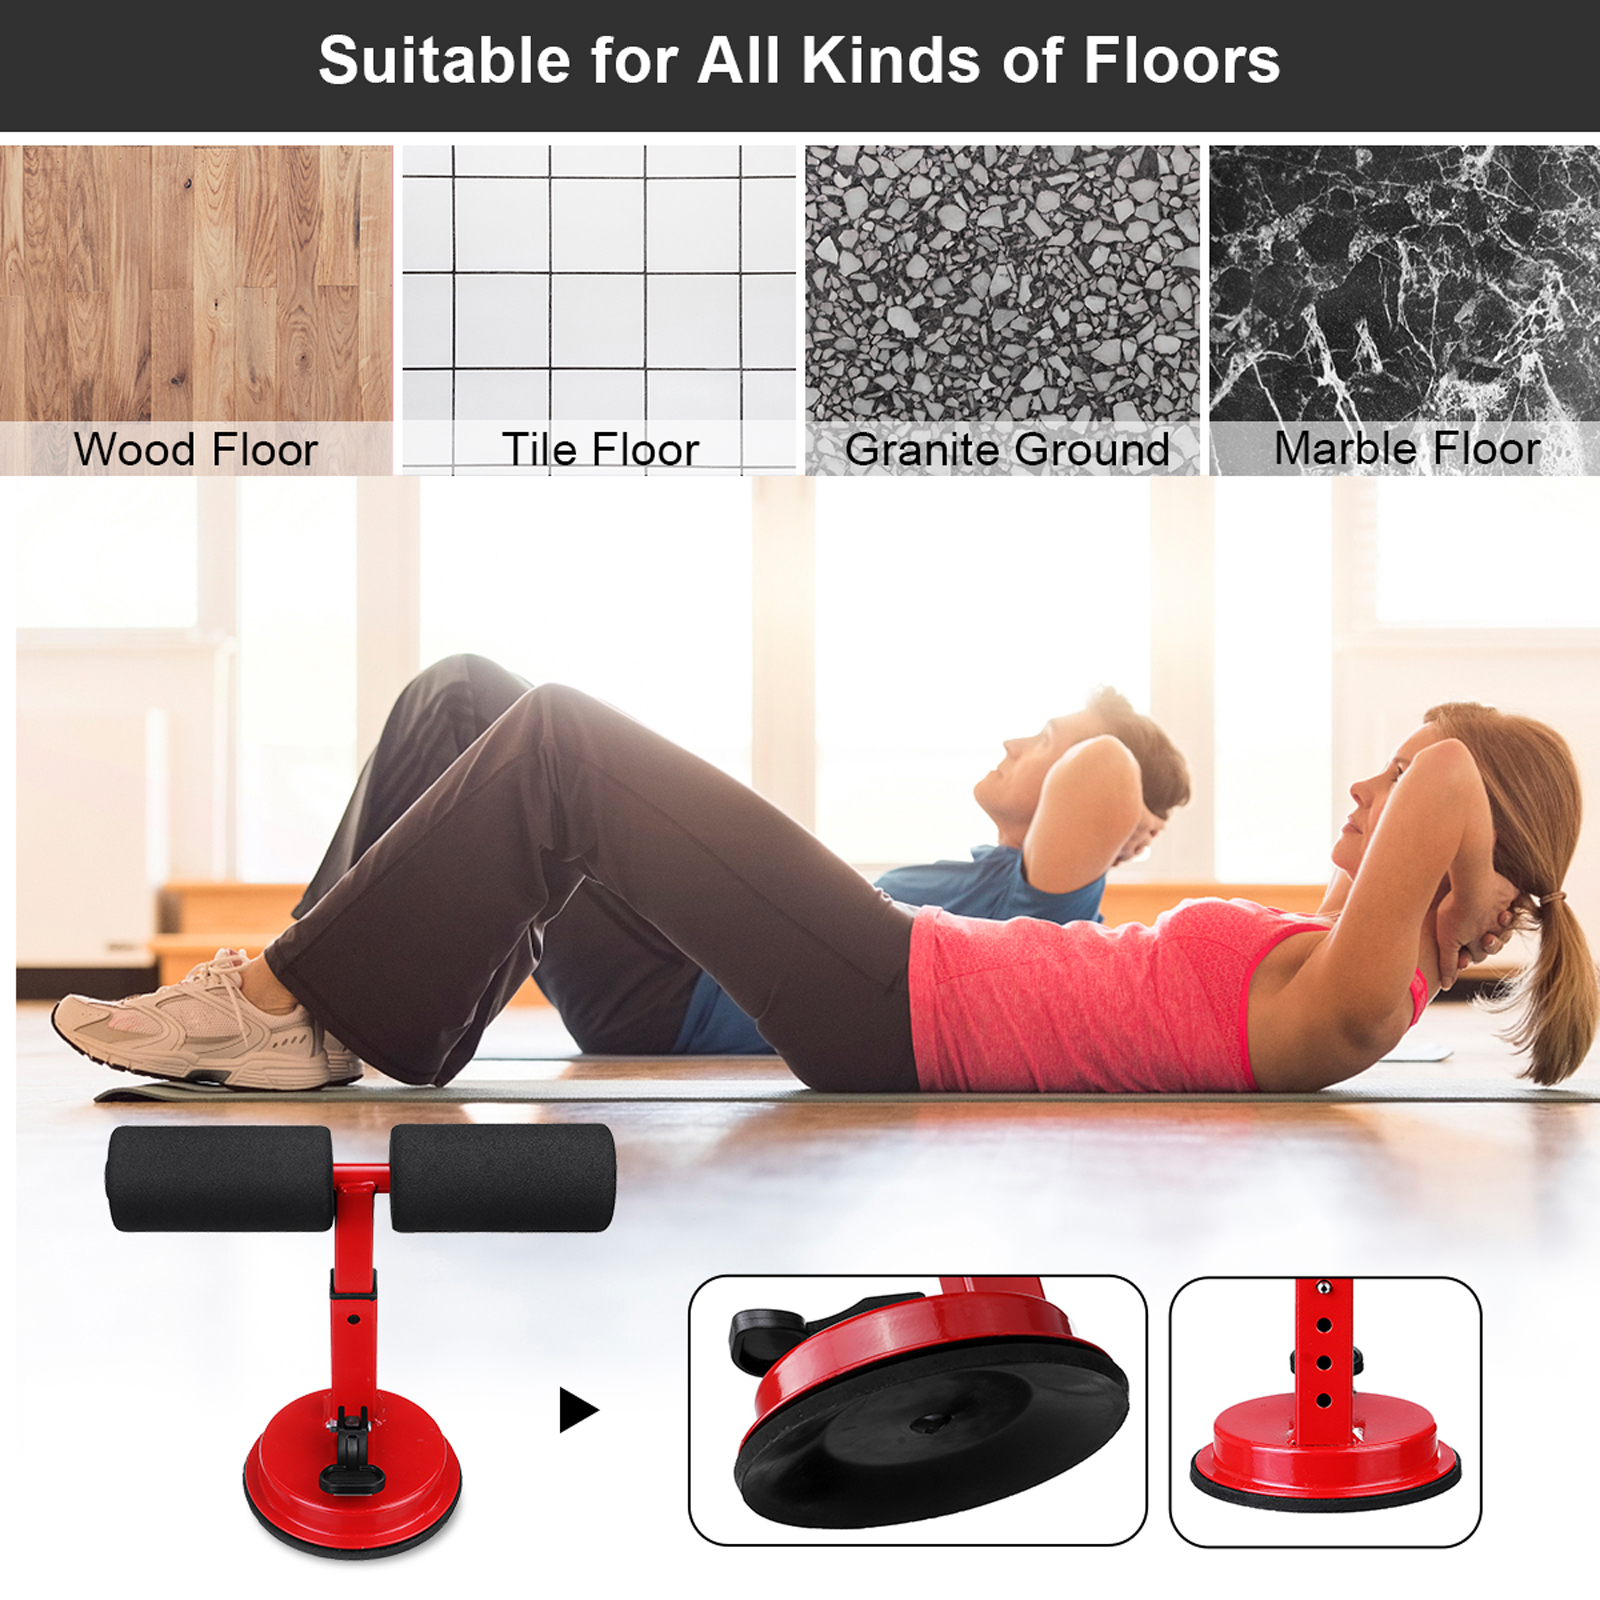 Suction-Sit-Up-Stand-Bars-Portable-Core-Strength-Muscle-Training-Safety-Body-Building-Fitness-Equipm-1810083-6